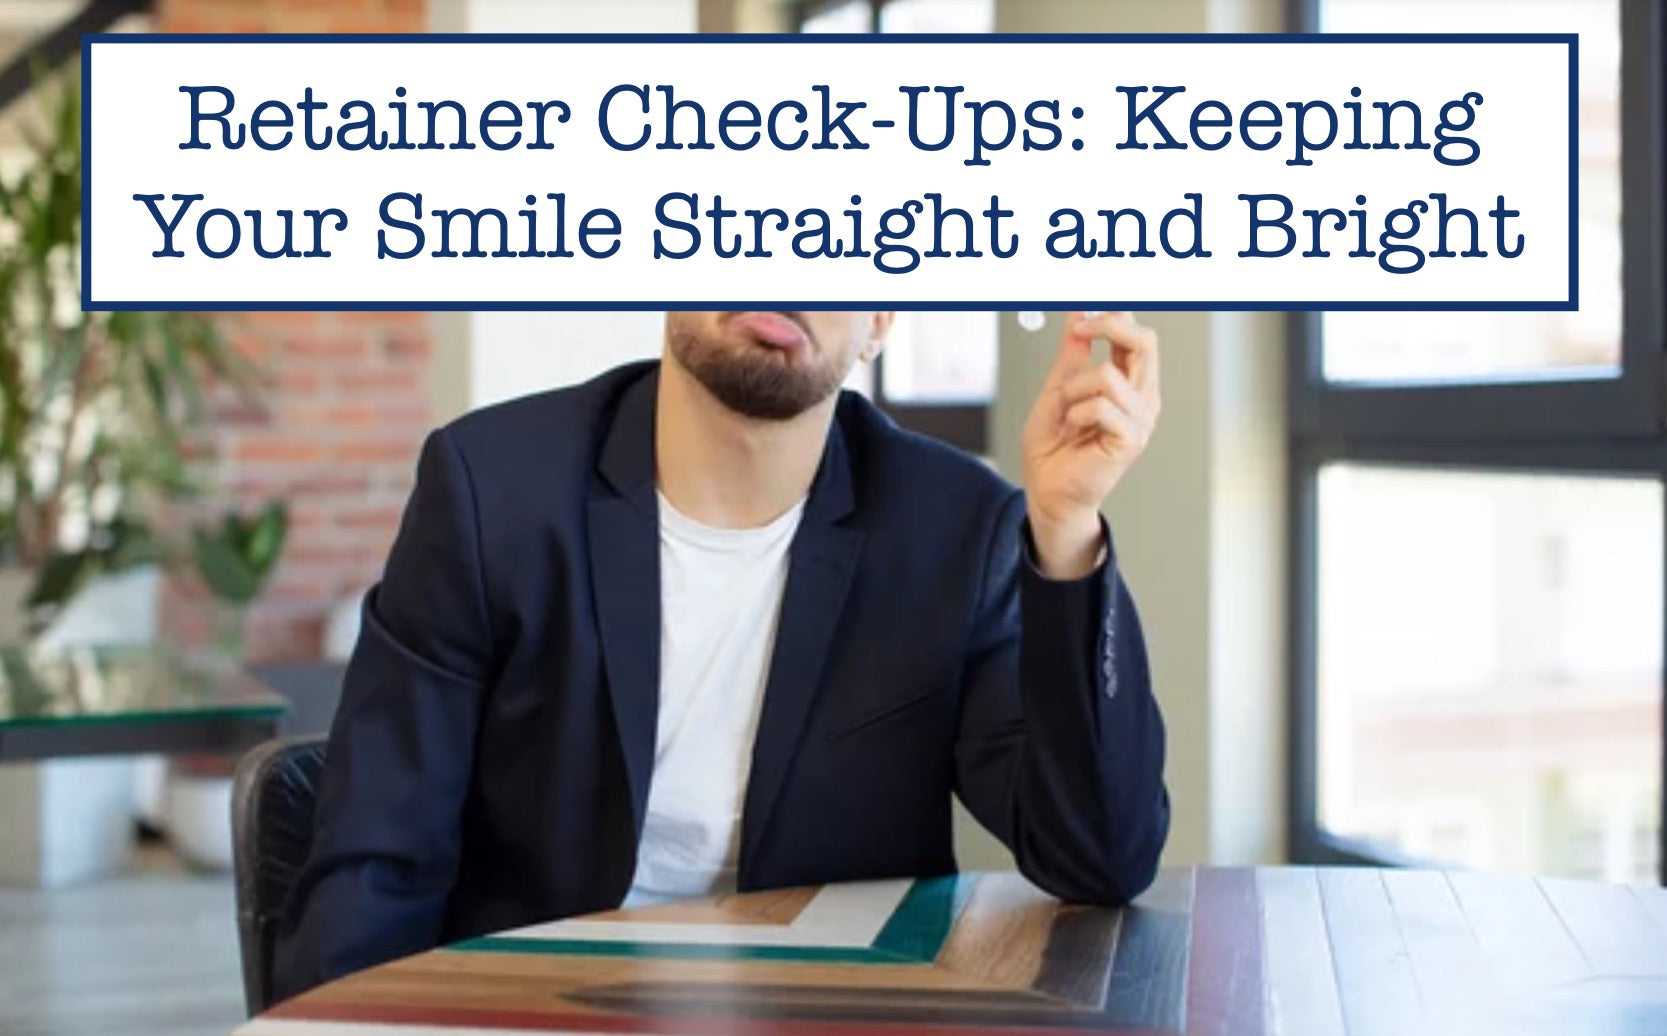 Retainer Check-Ups: Keeping Your Smile Straight and Bright